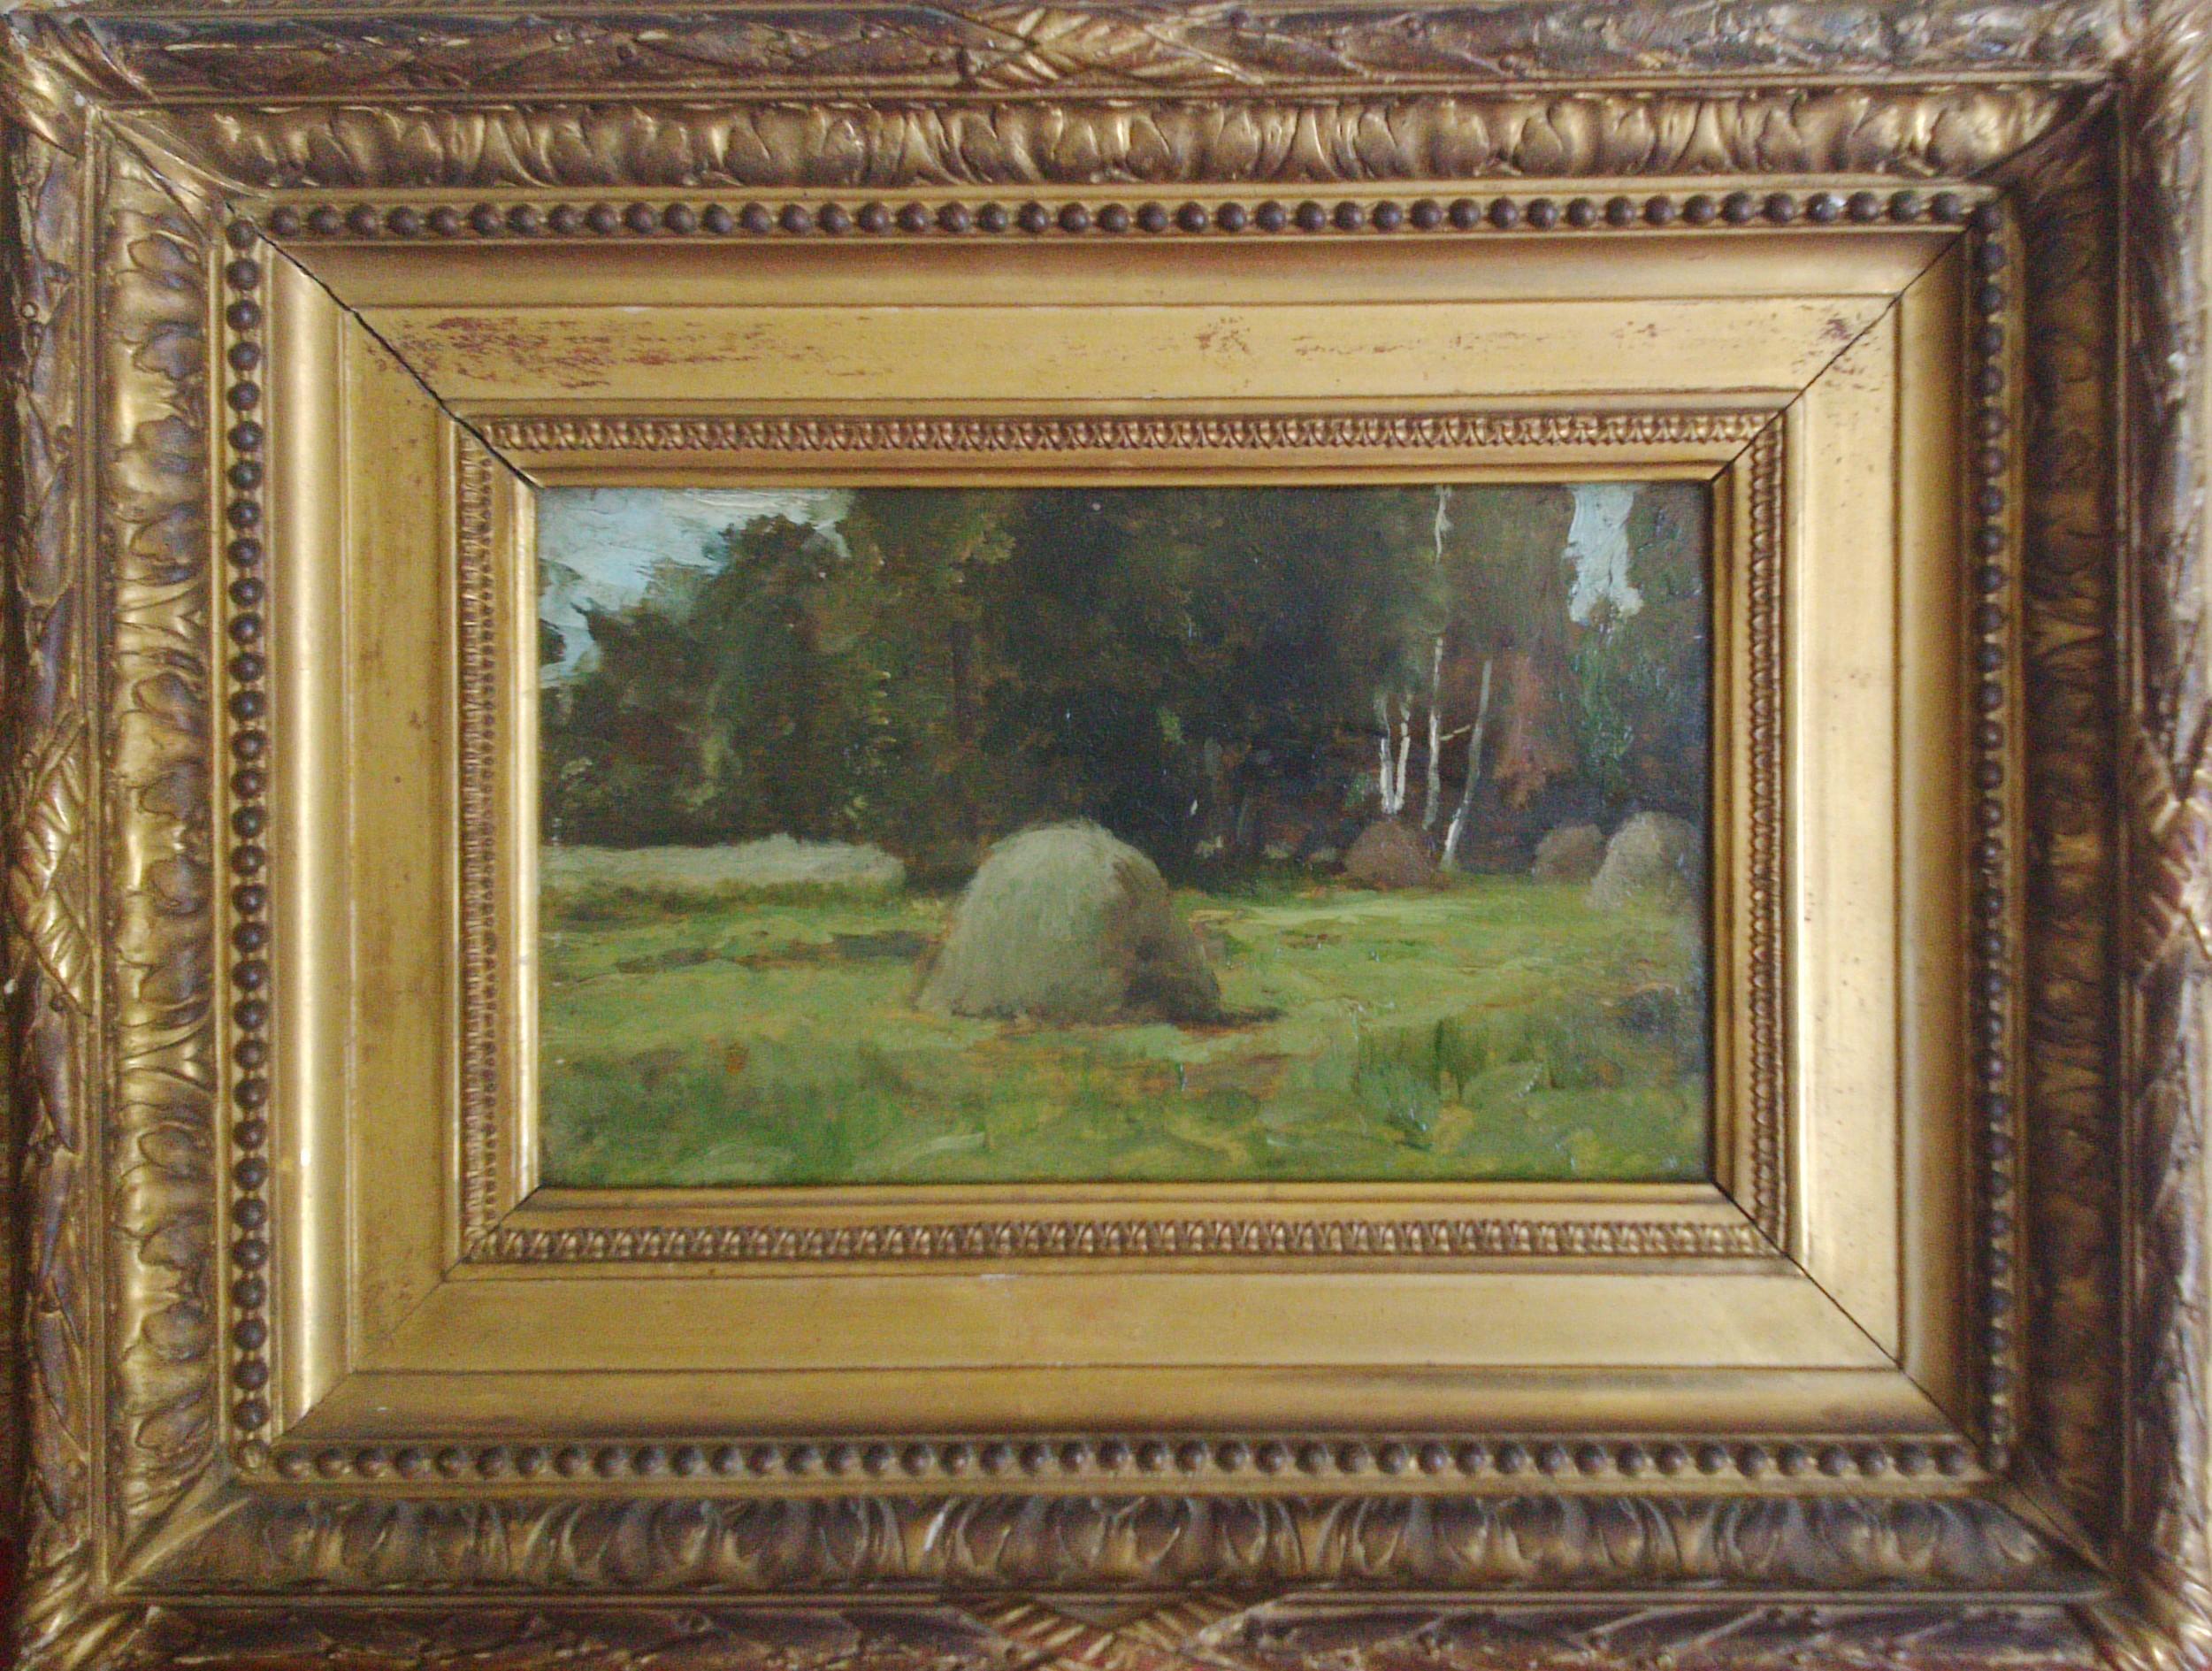 Study of Haystacks, 19th c. Barbizon School - Painting by Unknown